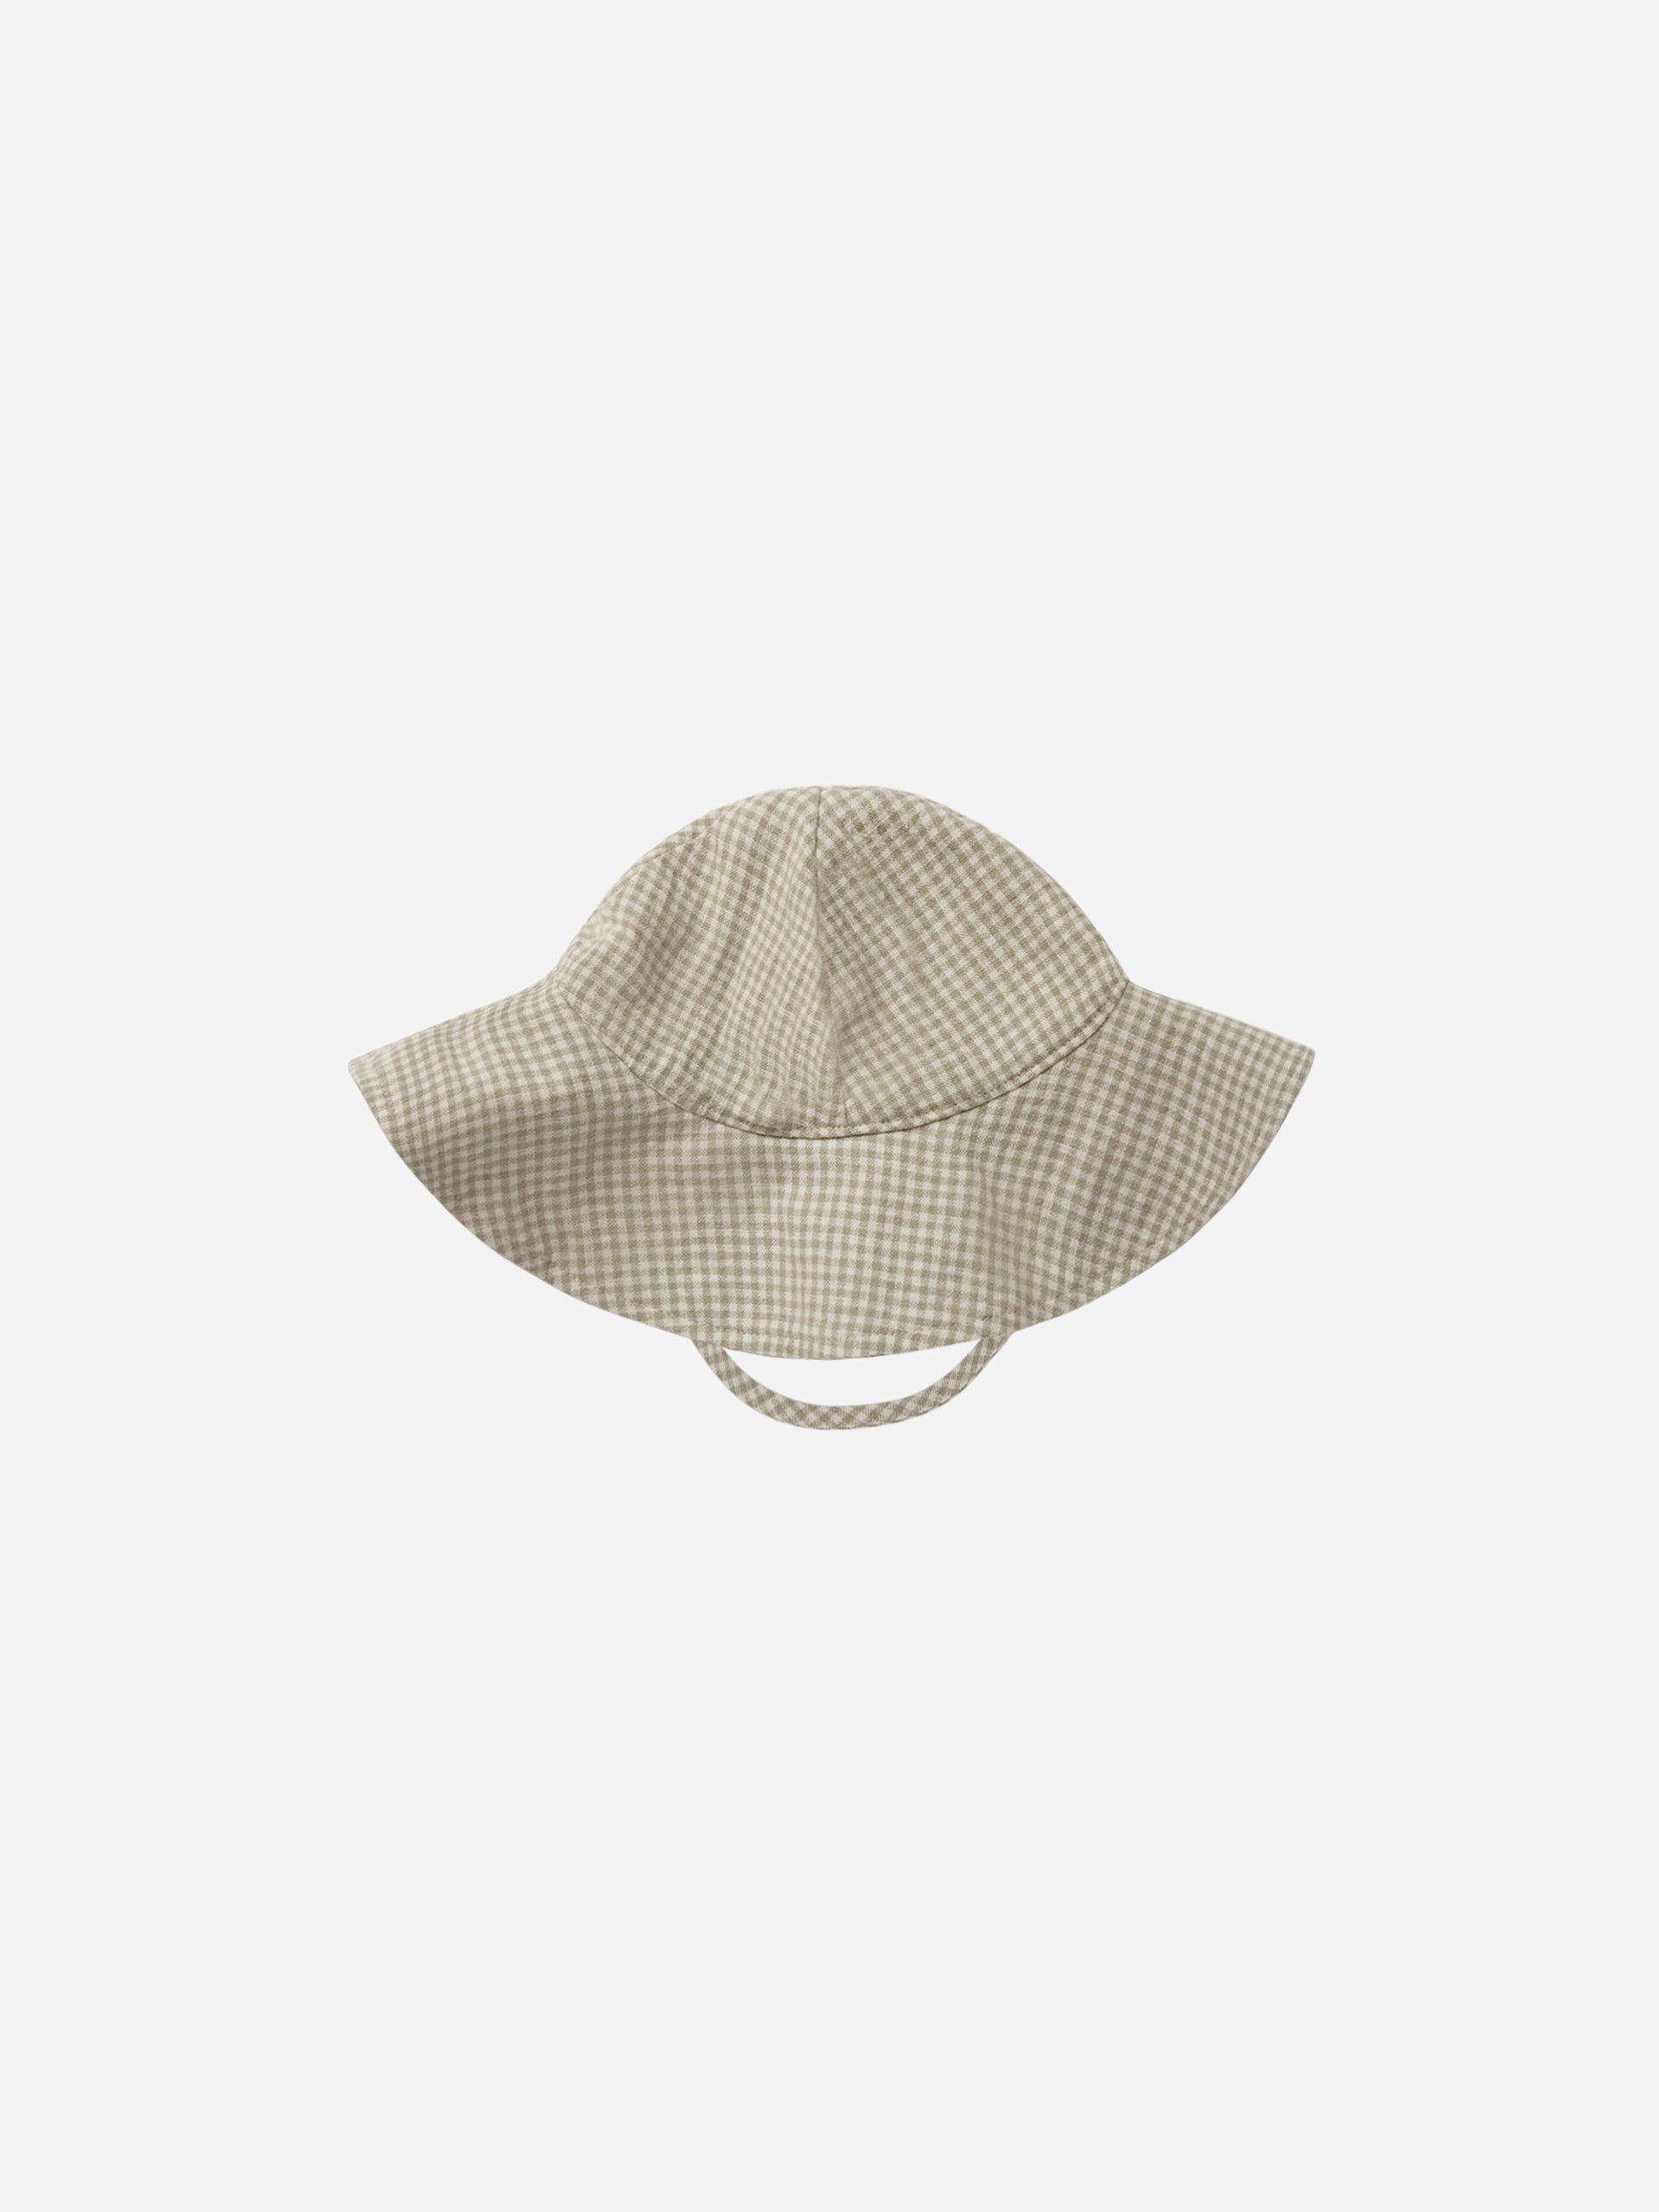 Floppy Sun Hat || Sage Gingham - Rylee + Cru | Kids Clothes | Trendy Baby Clothes | Modern Infant Outfits |